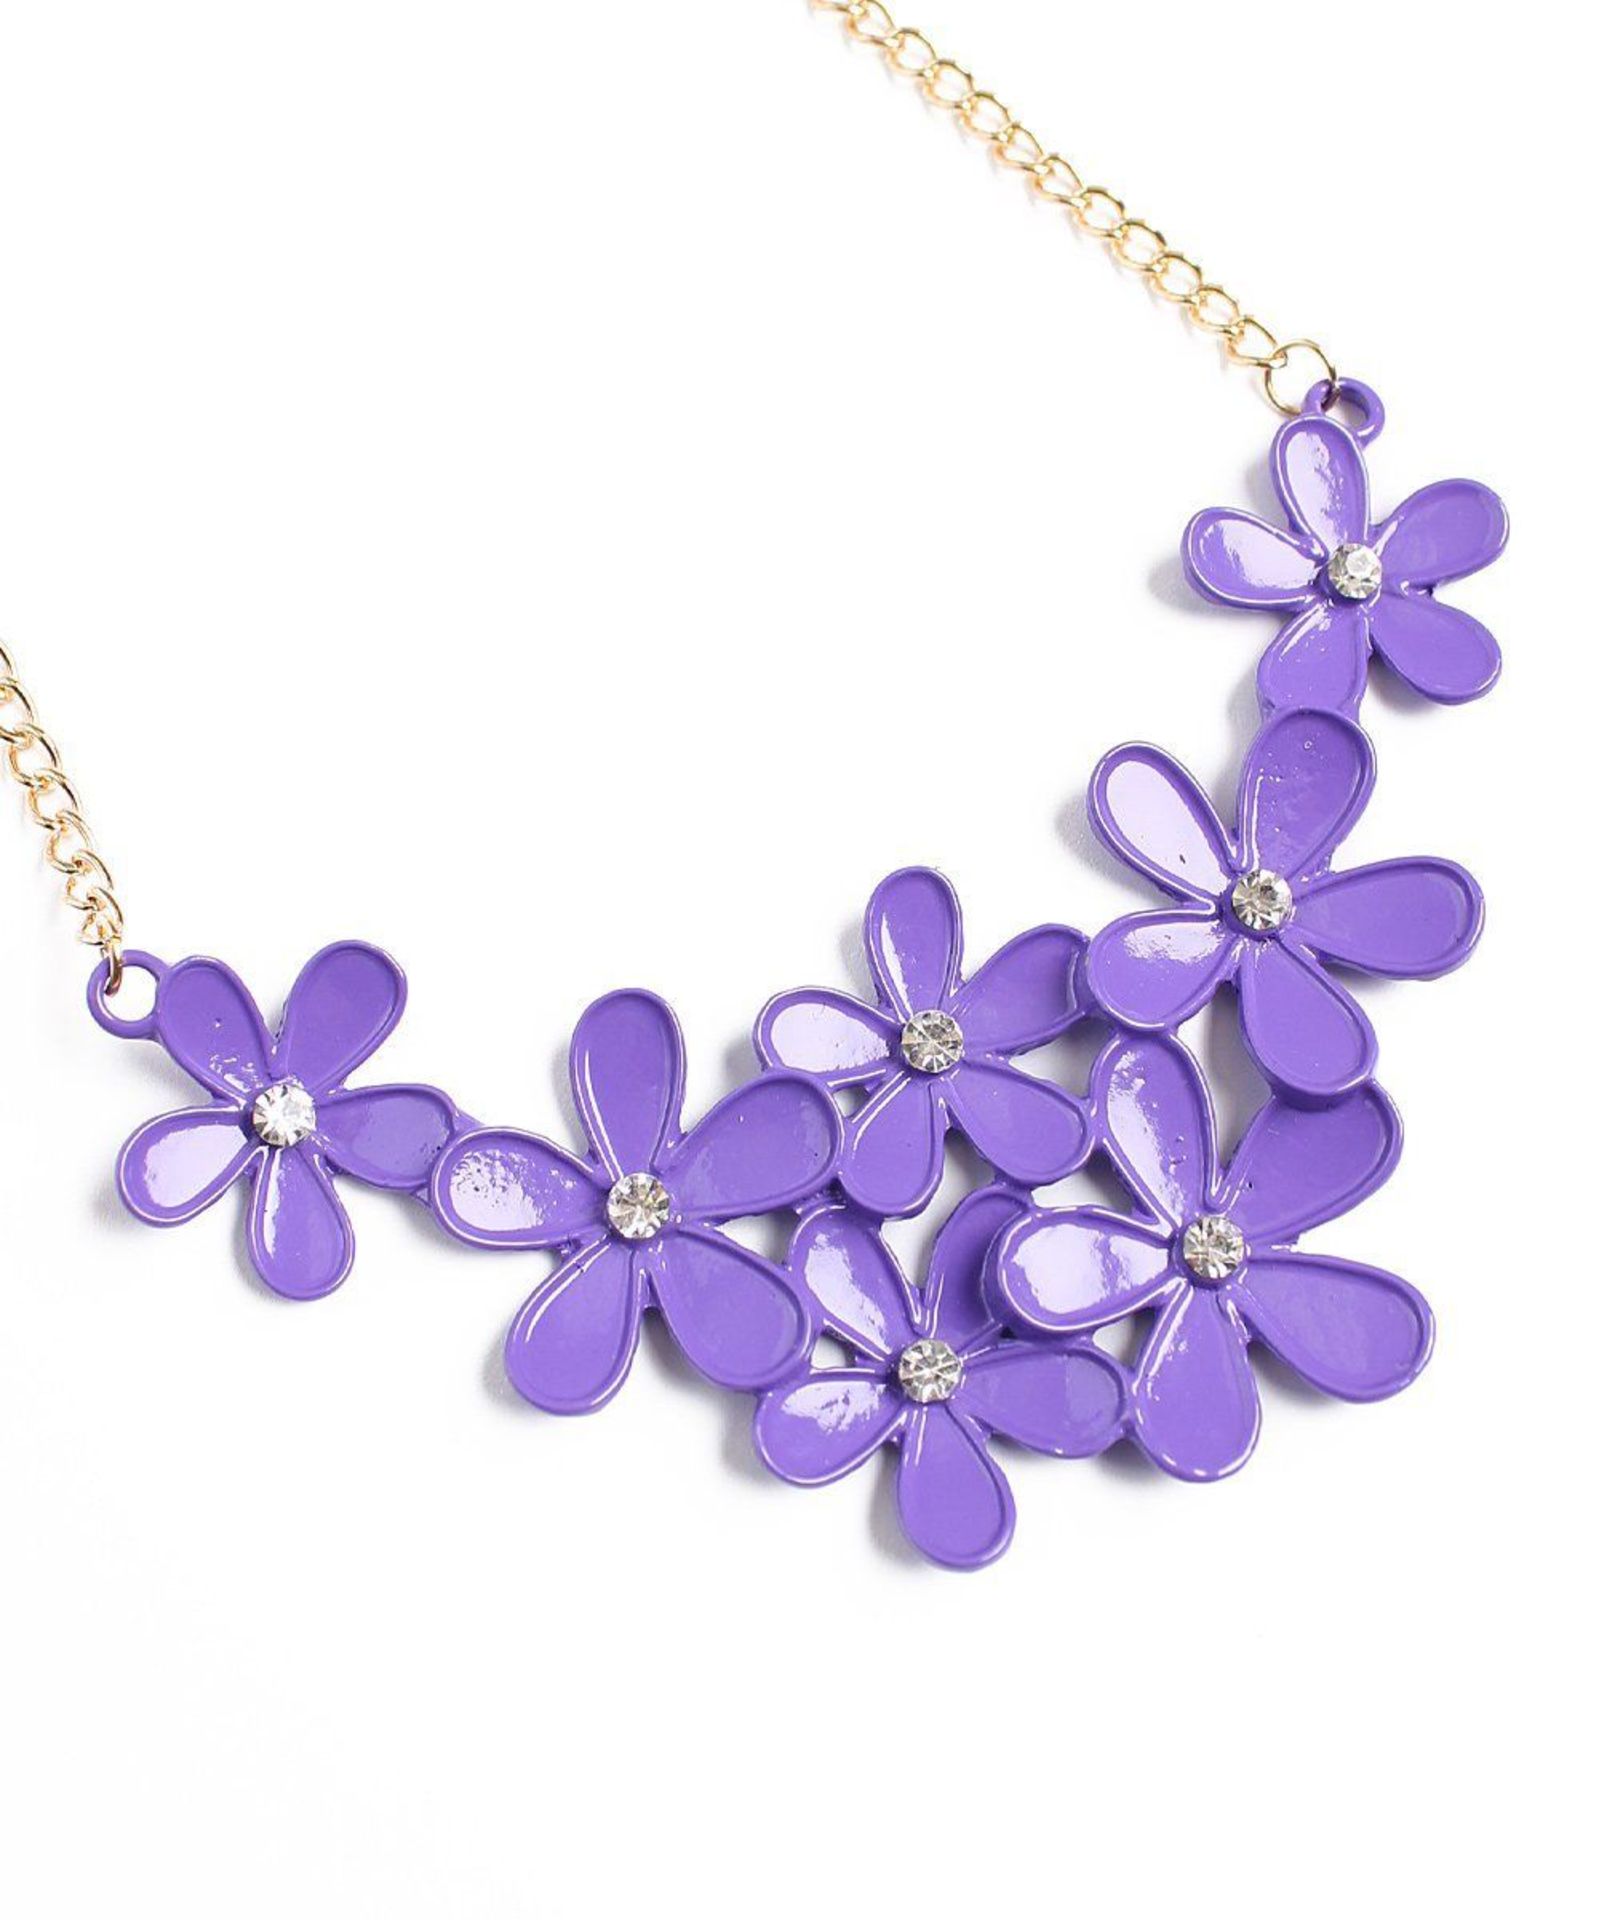 Riah Fashion Purple Flower Statement Necklace (New with tags) [Ref: 38251066- T-82] - Image 2 of 2